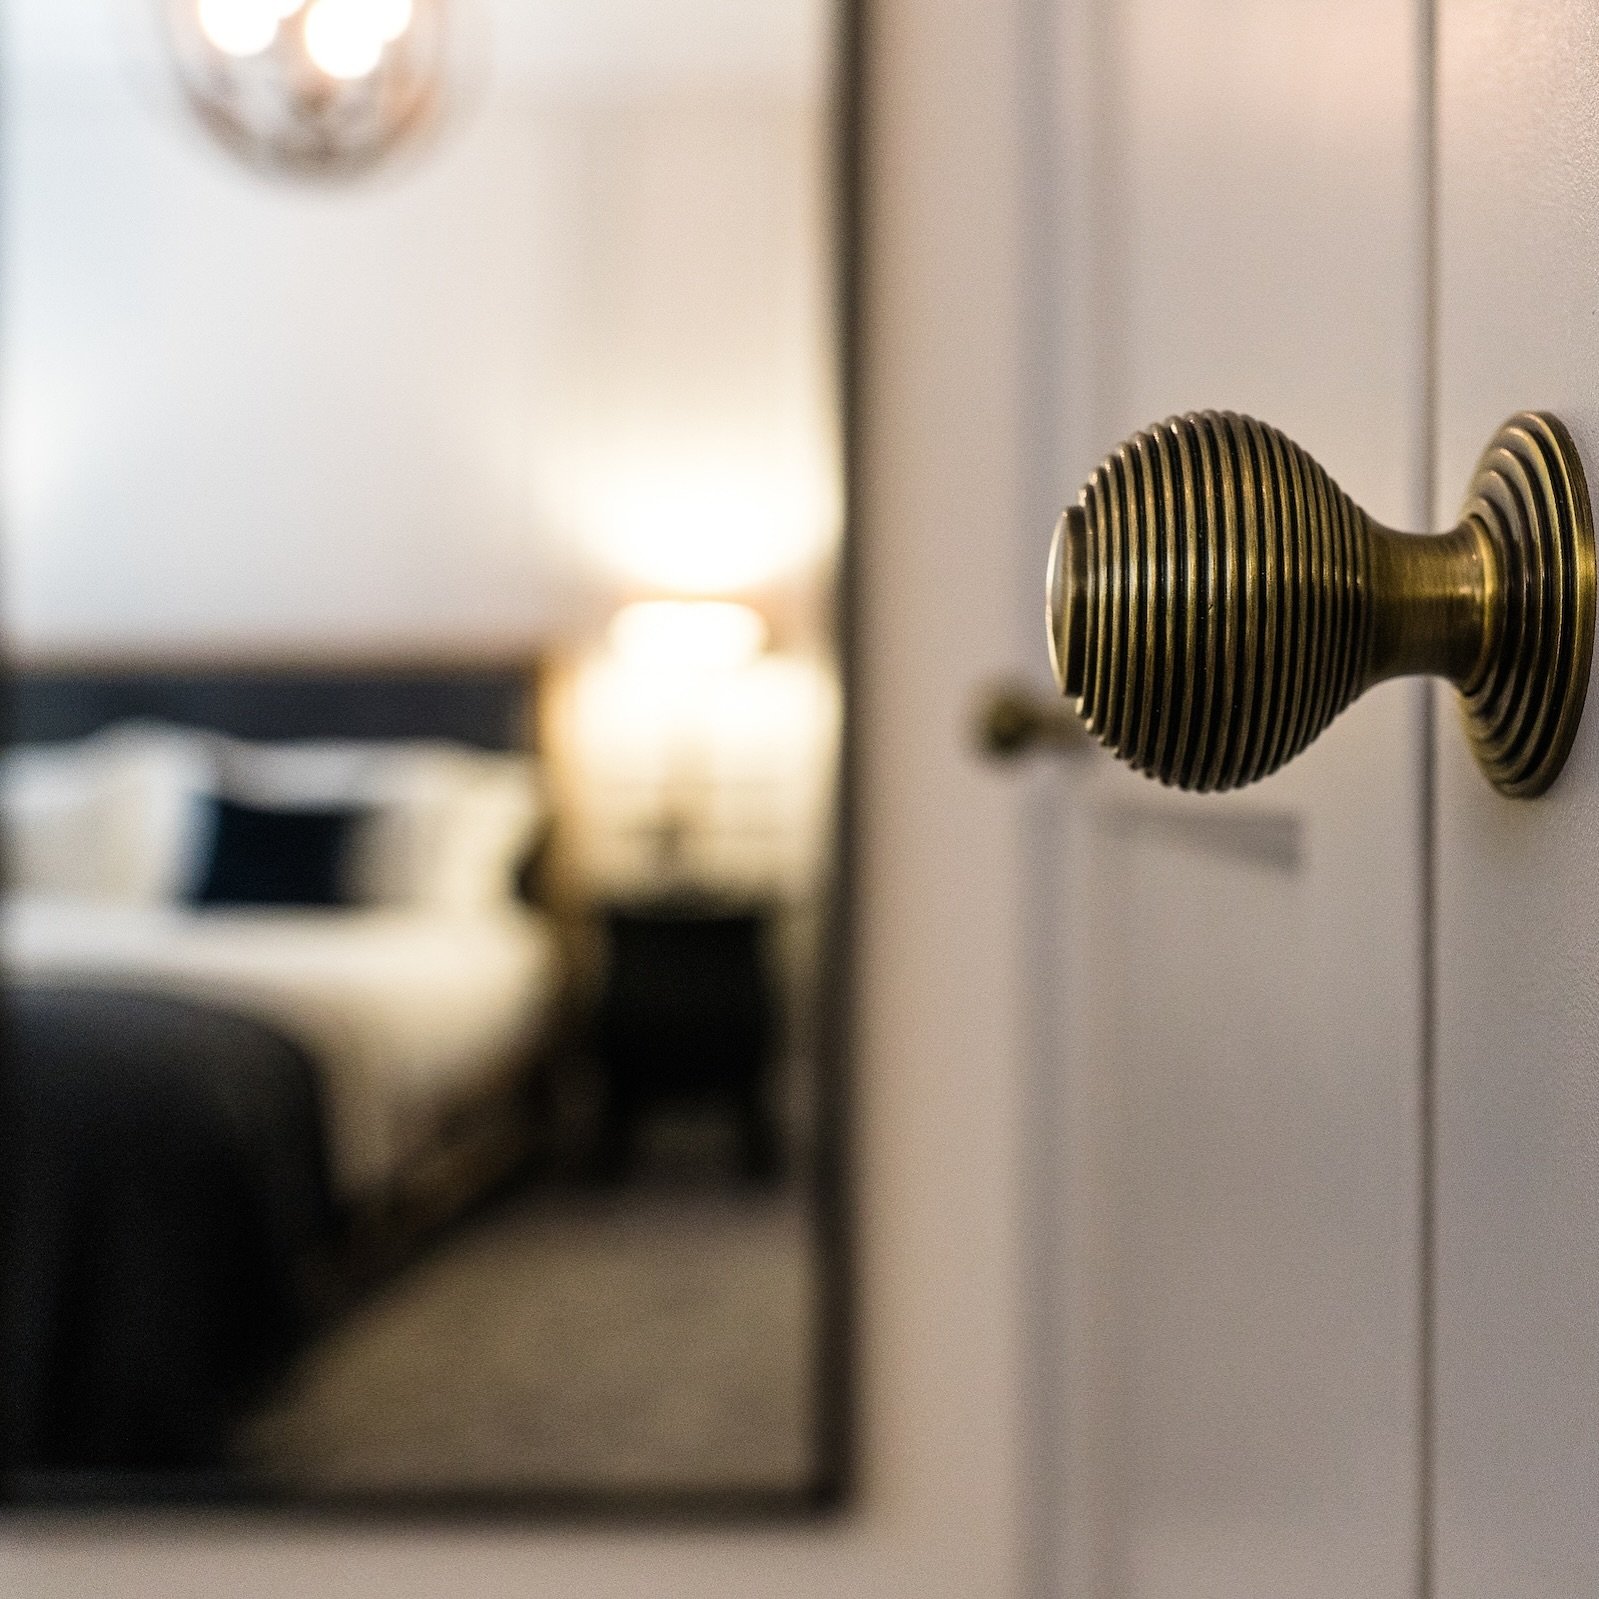 Behind every door of Regency House, the legacy lives on.

#RegencyHouse #BelfastHospitalityHouse